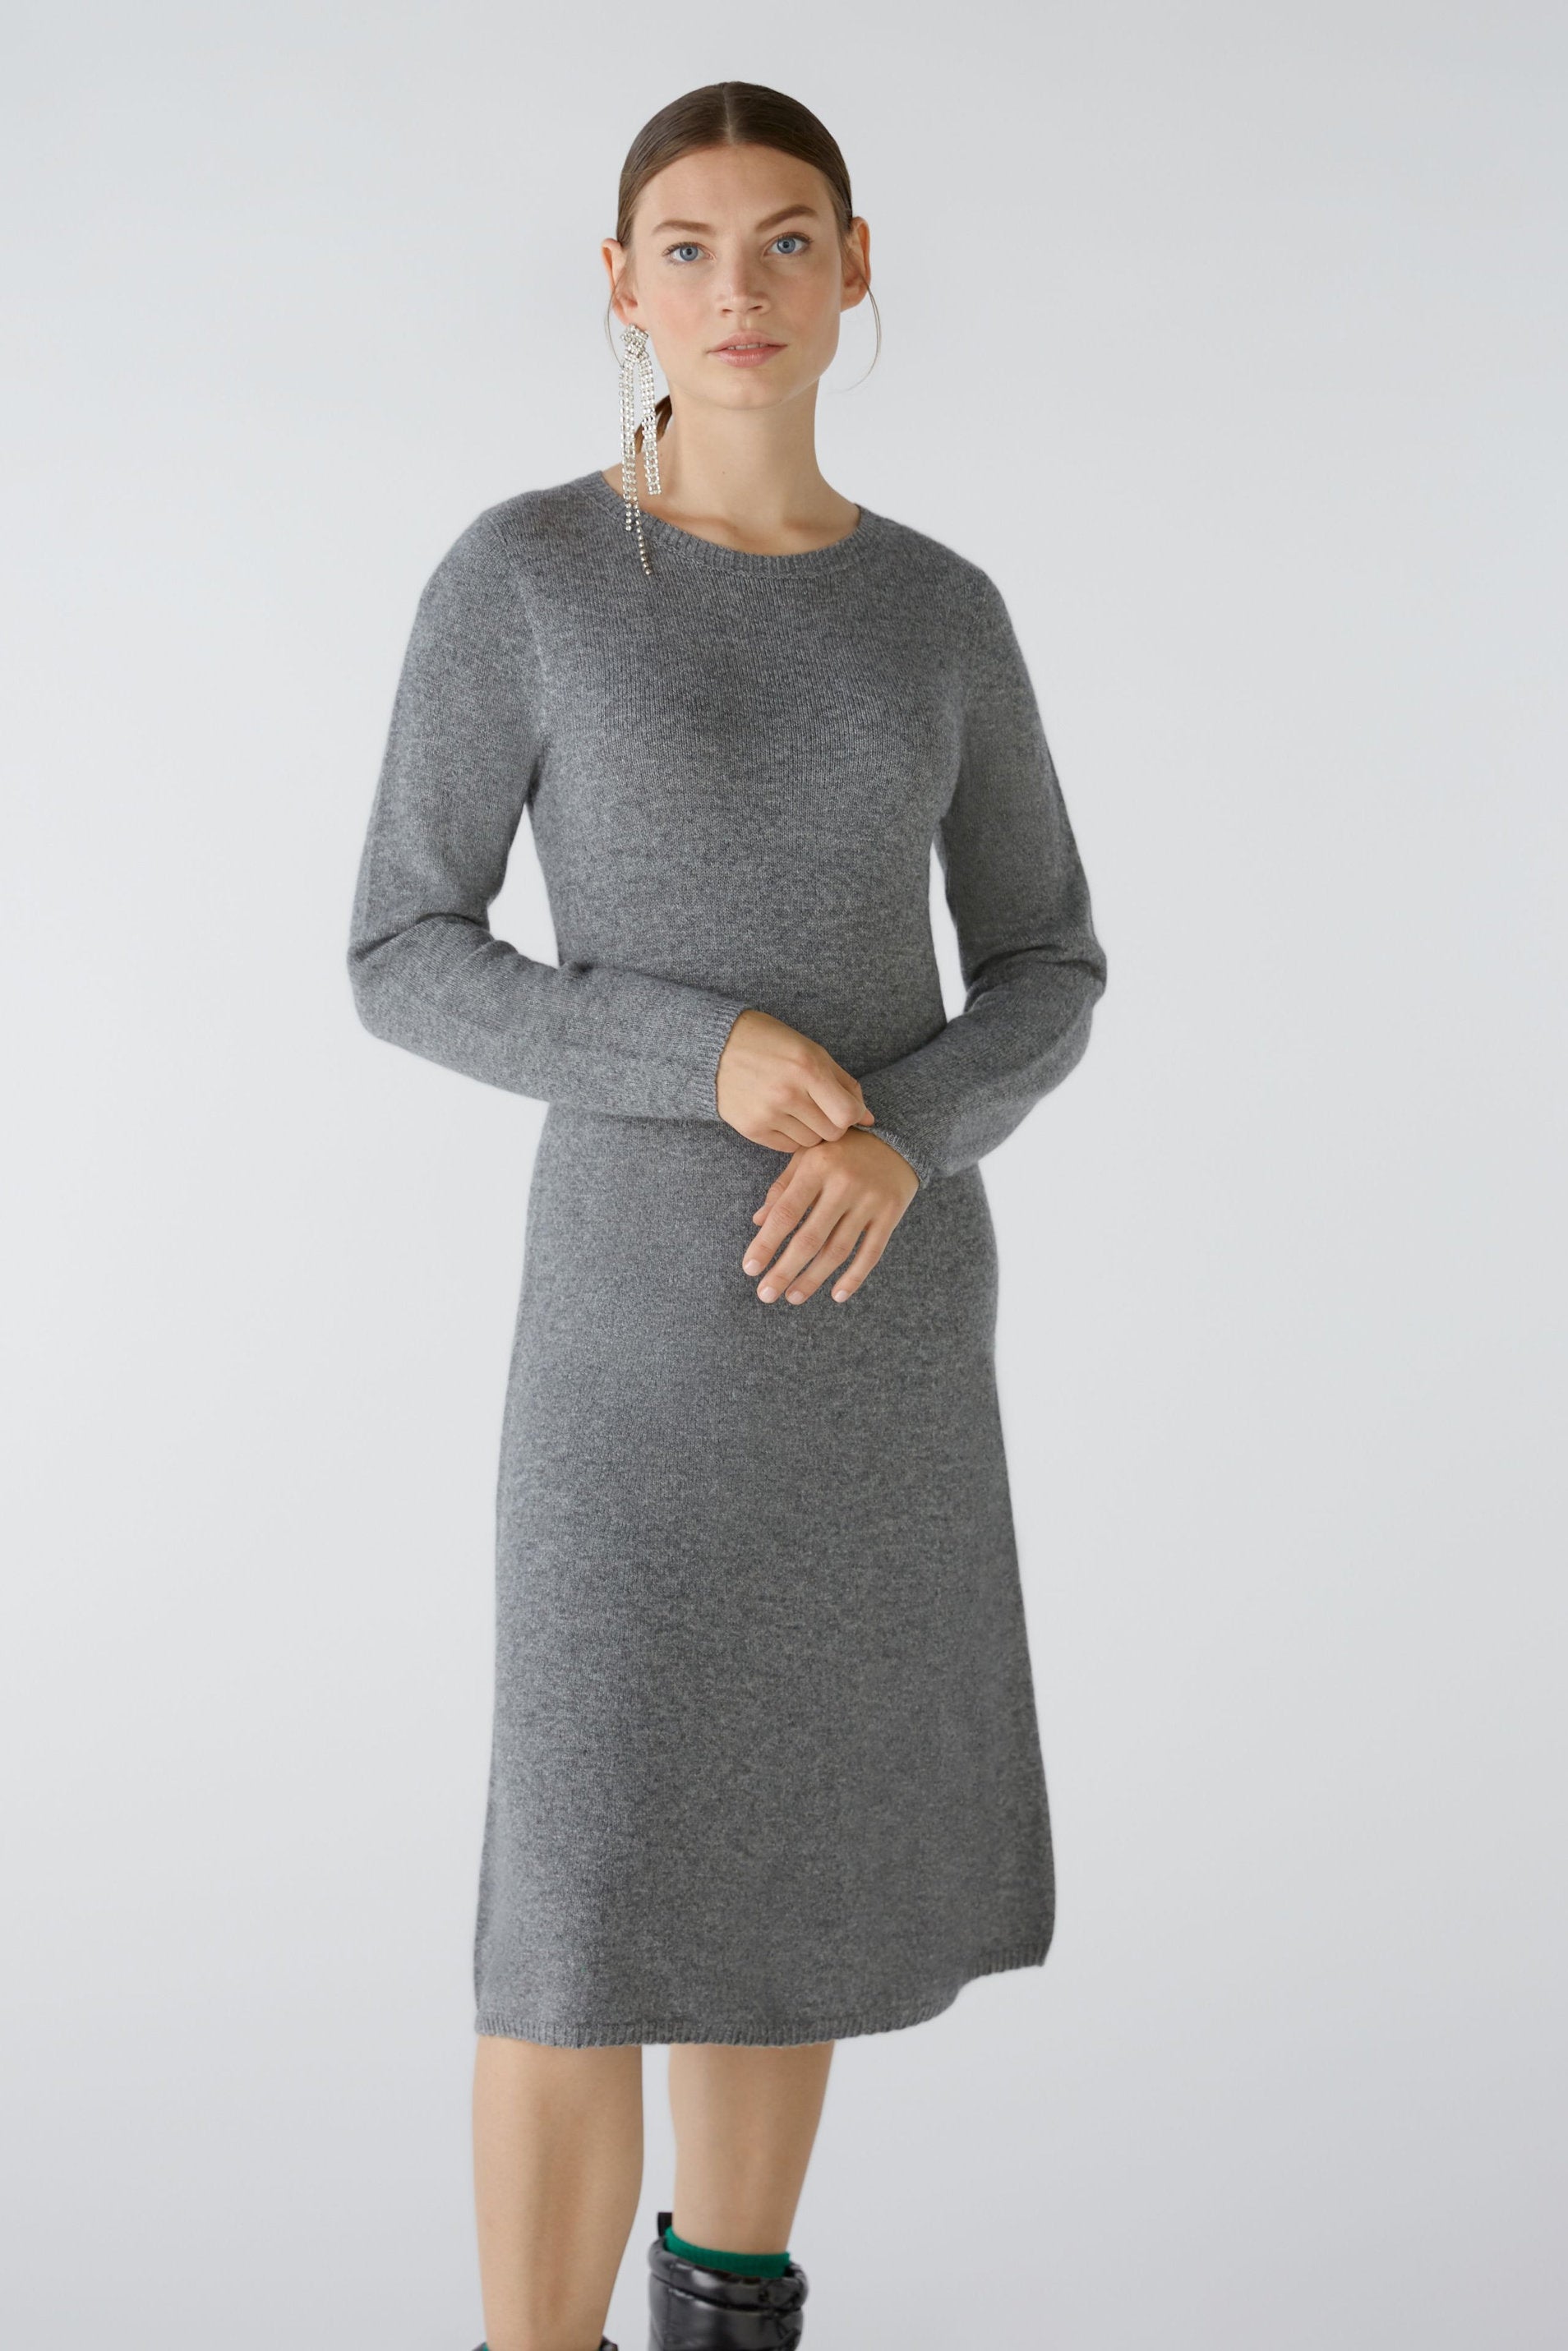 Knitted Dress Wool Blend With Modal_79699_9559_05